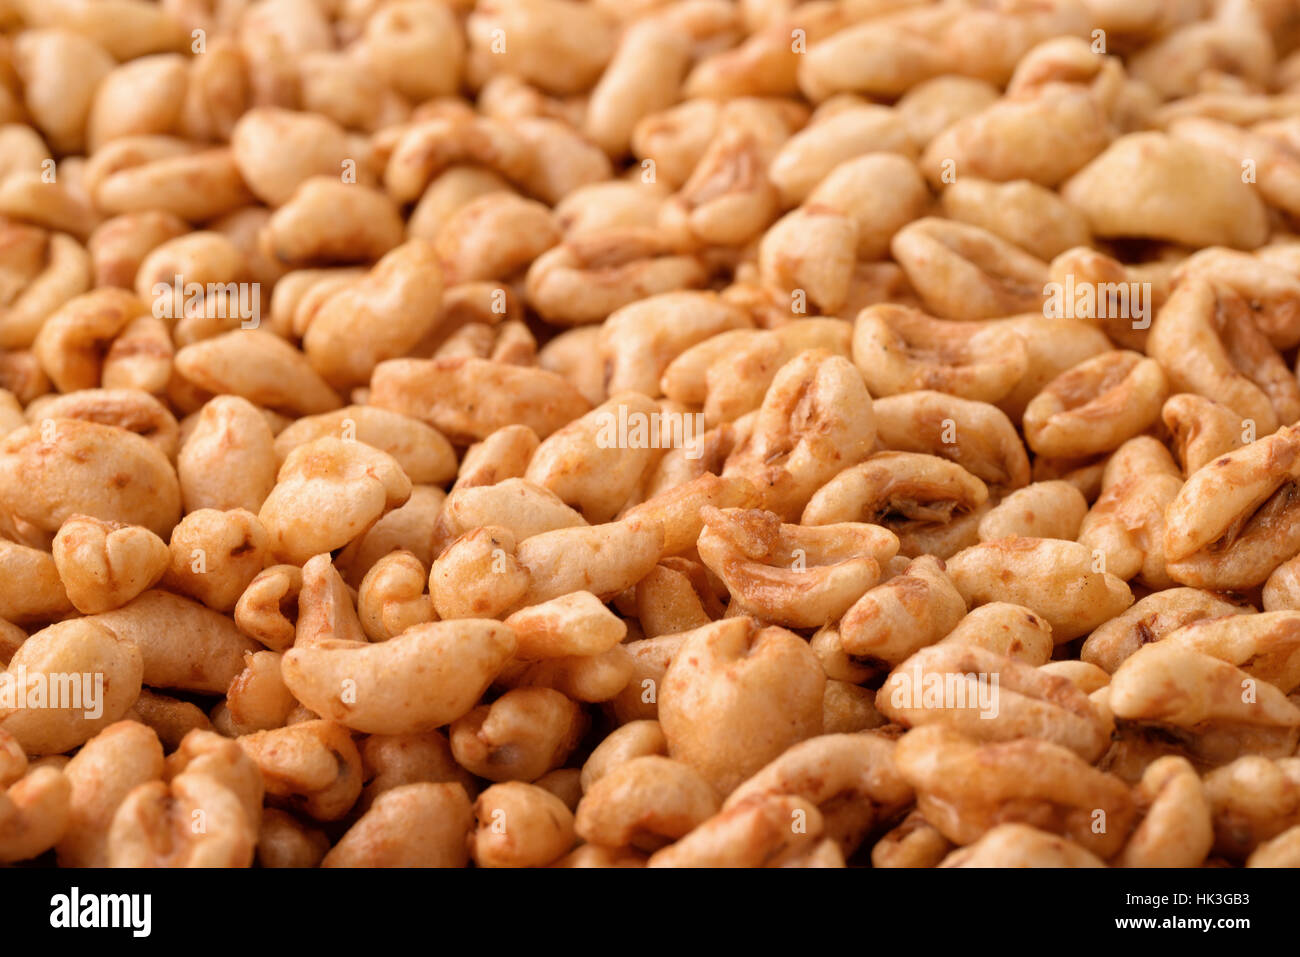 Puffed wheat cereal background Stock Photo